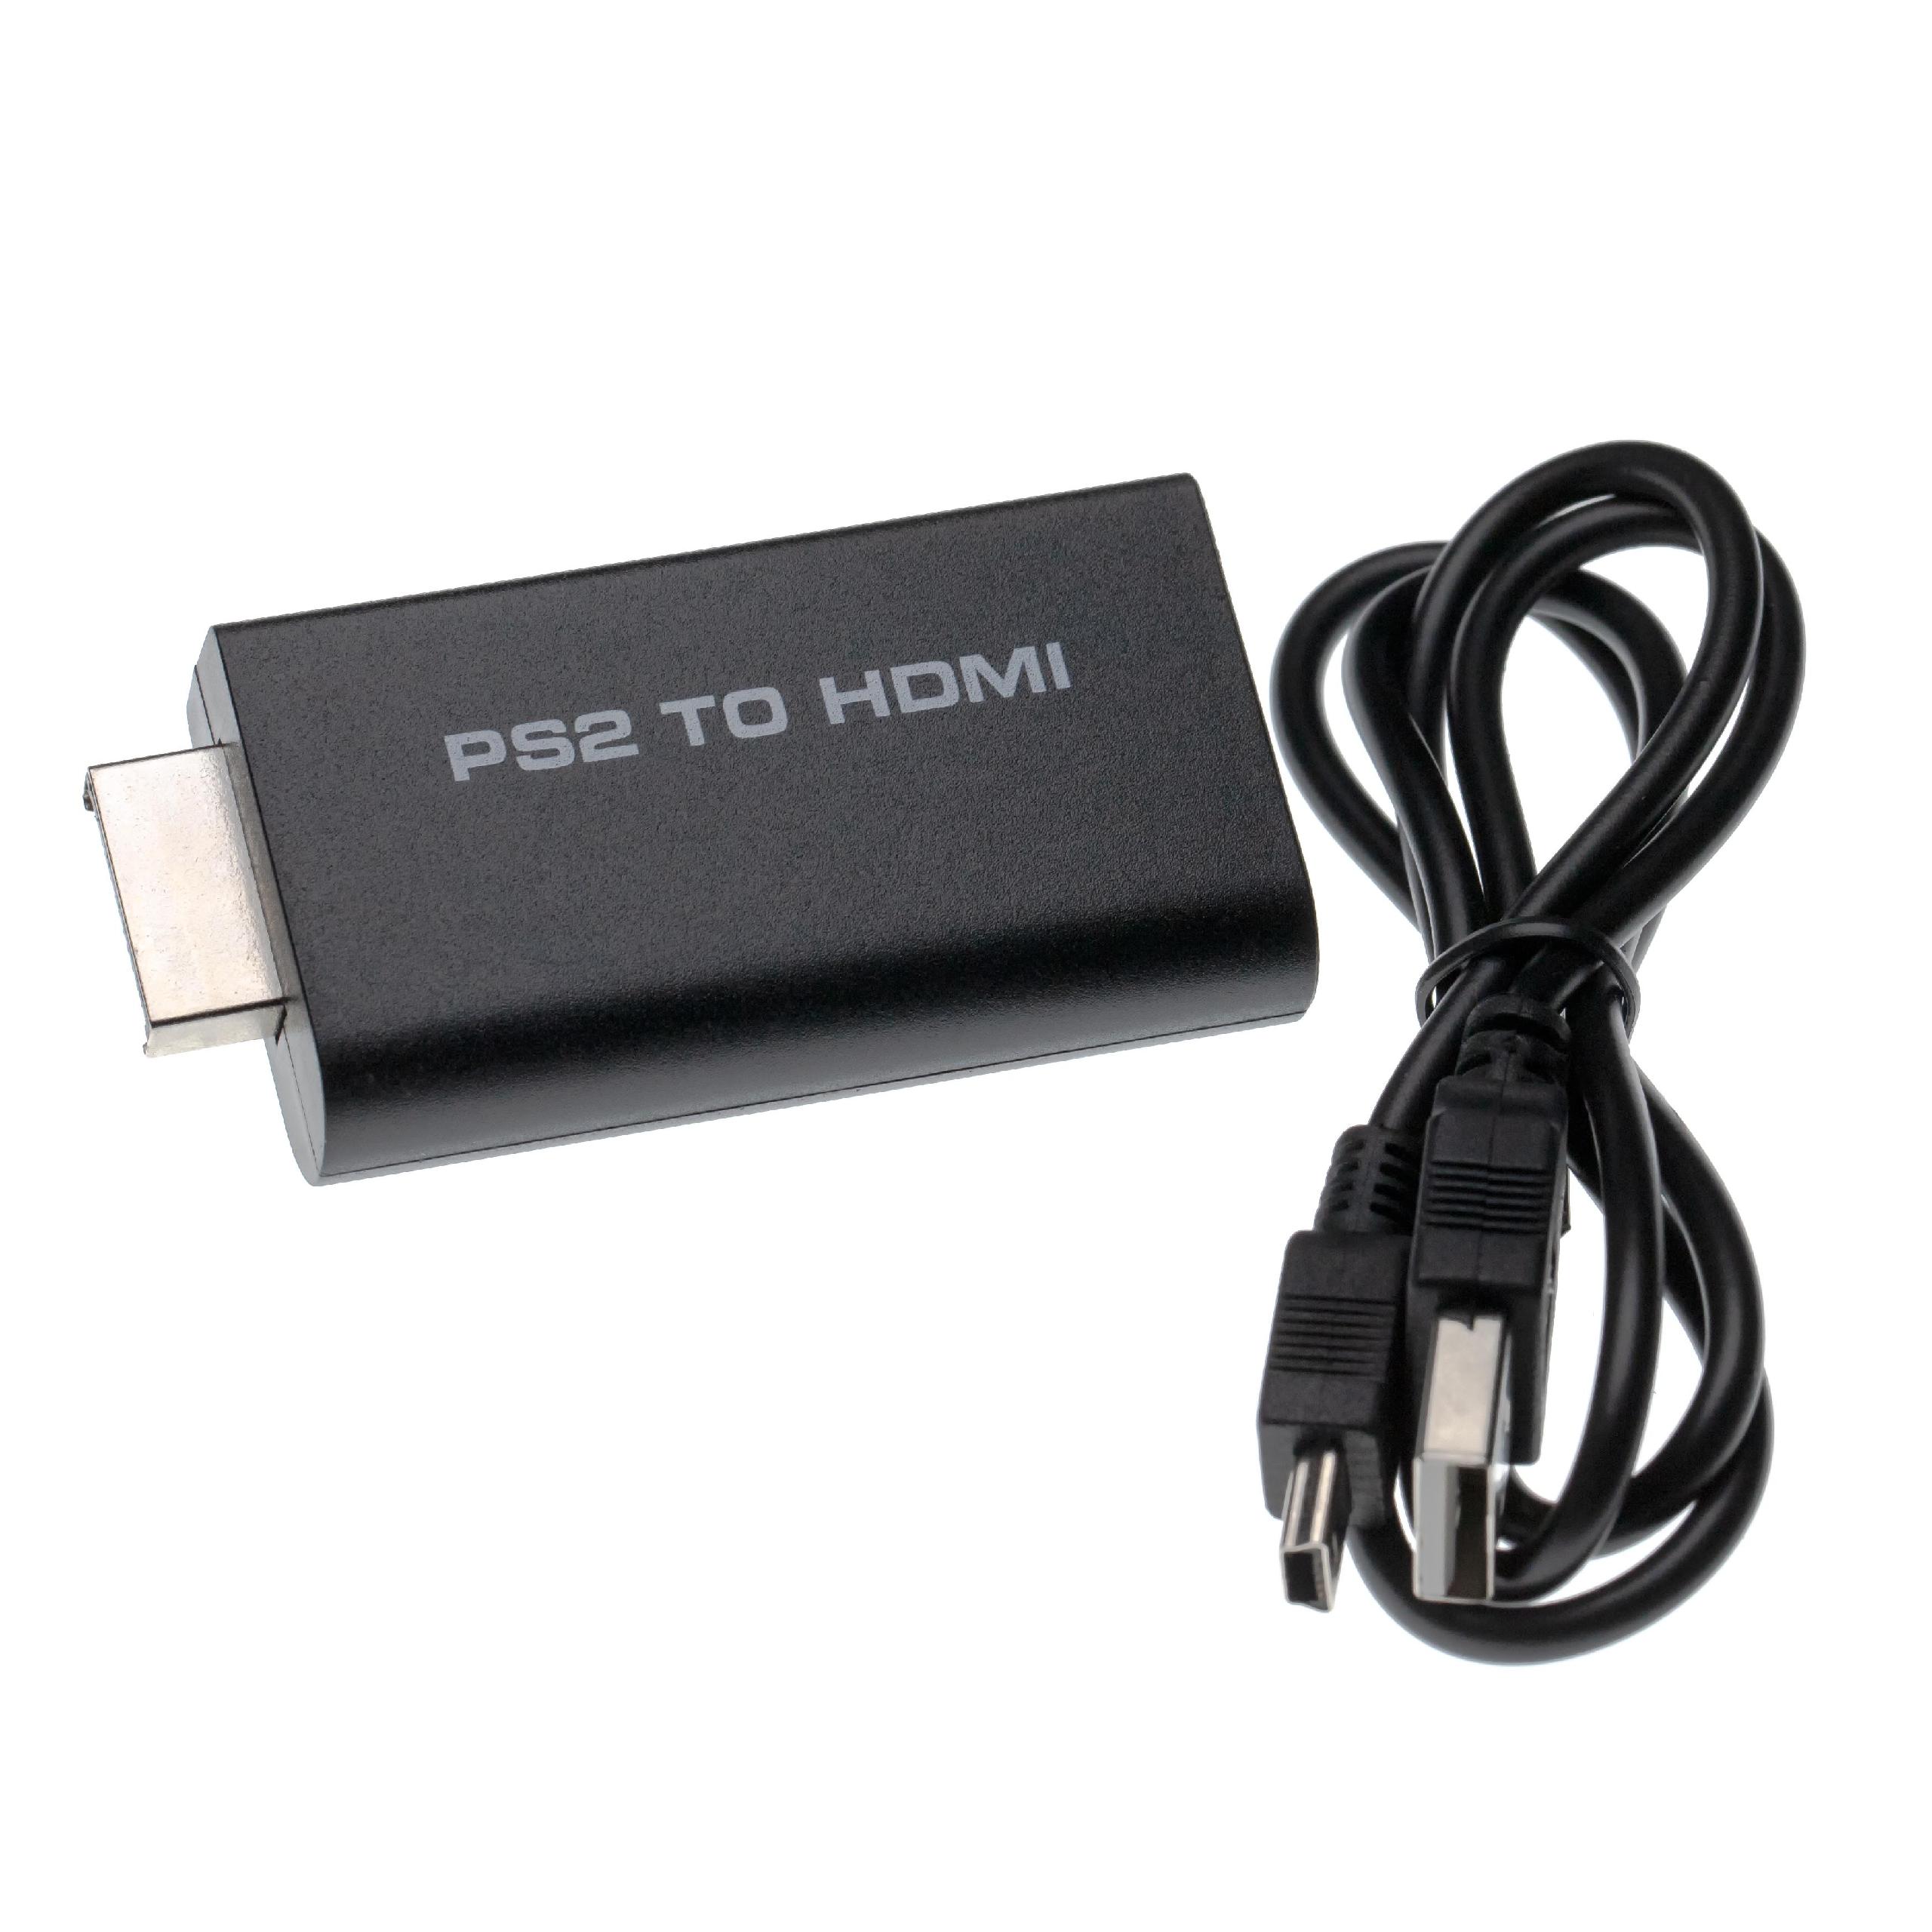 vhbw HDMI Adapter Games Console to HDMI Monitor / HDTV Converter + 3.5mm Audio Jack incl. USB Cable - black